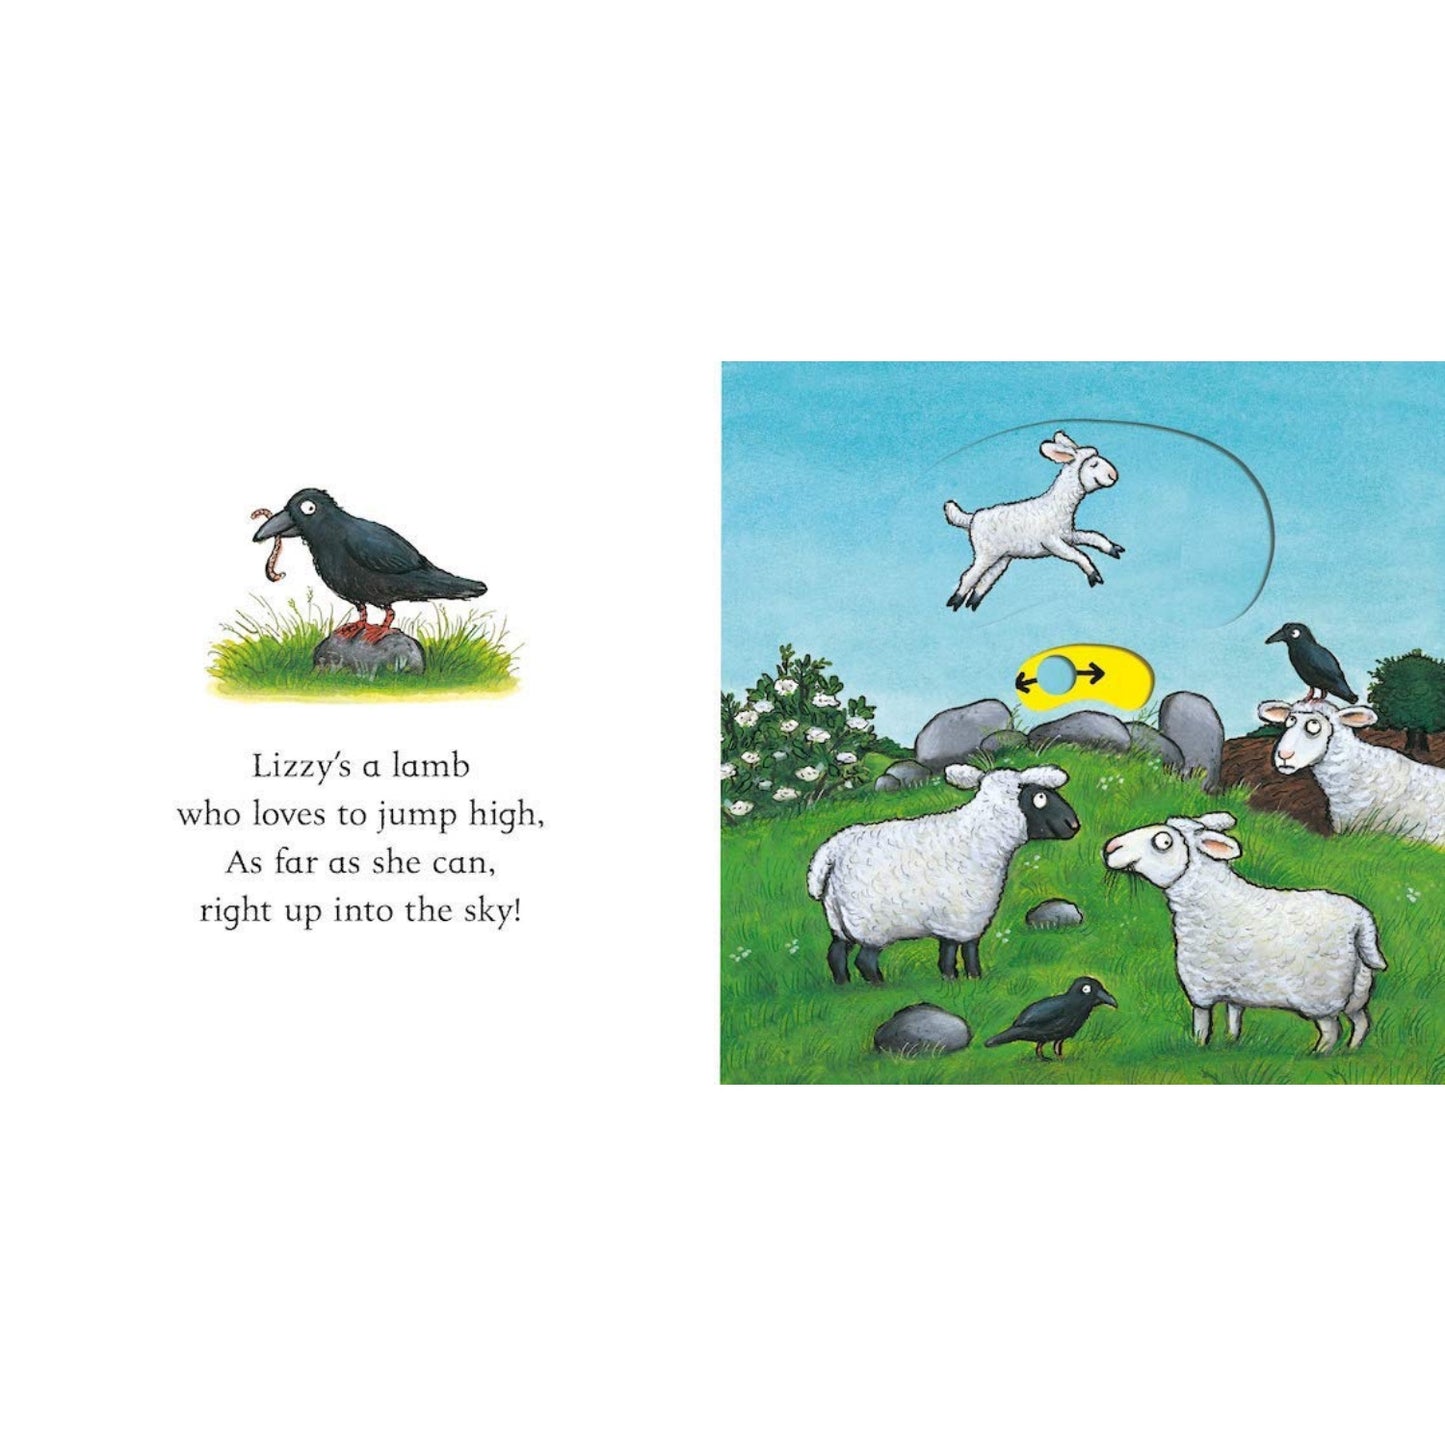 Lizzy the Lamb- A Push, Pull, Slide Board Book